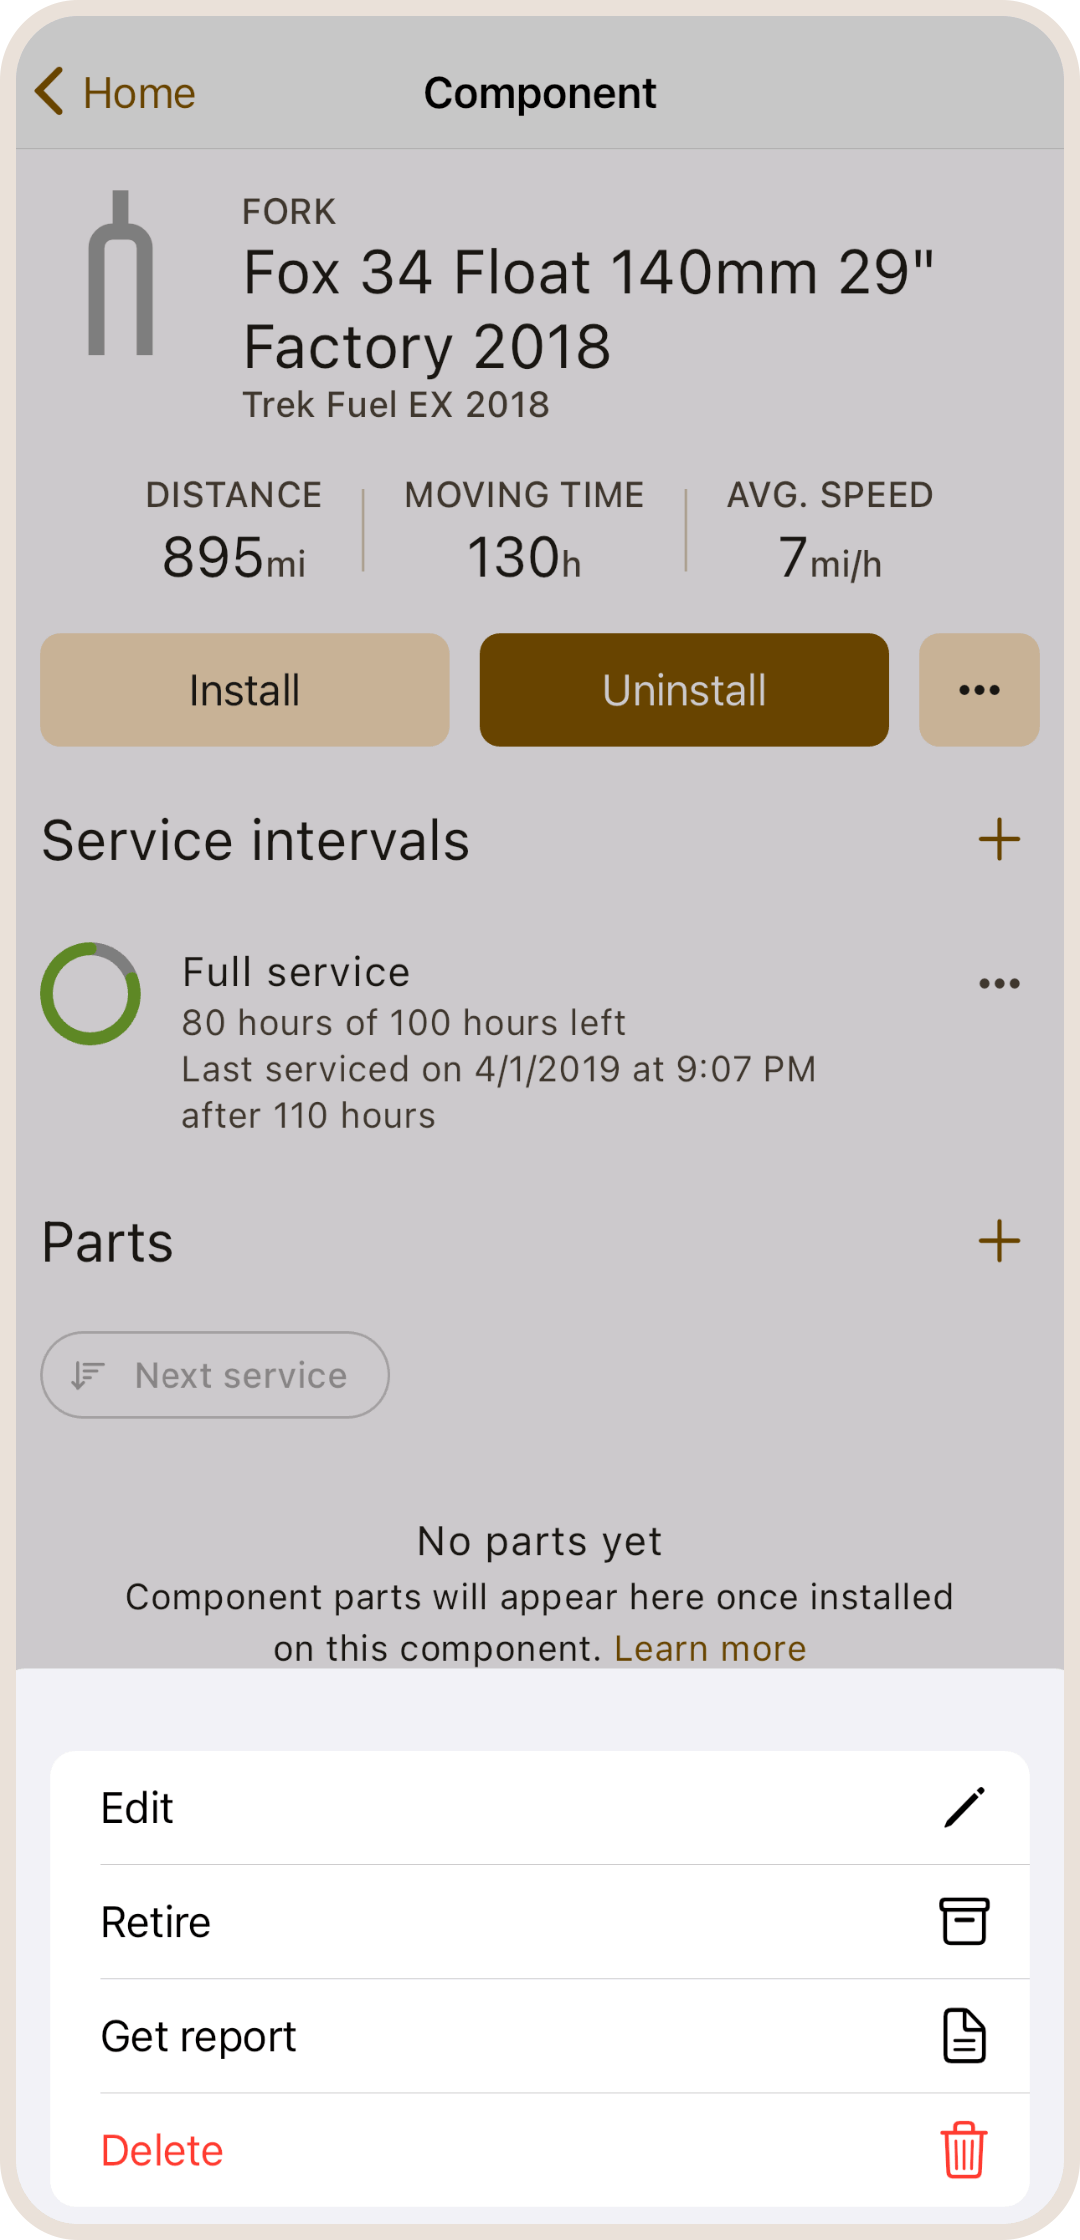 Component detail options in ProBikeGarage app